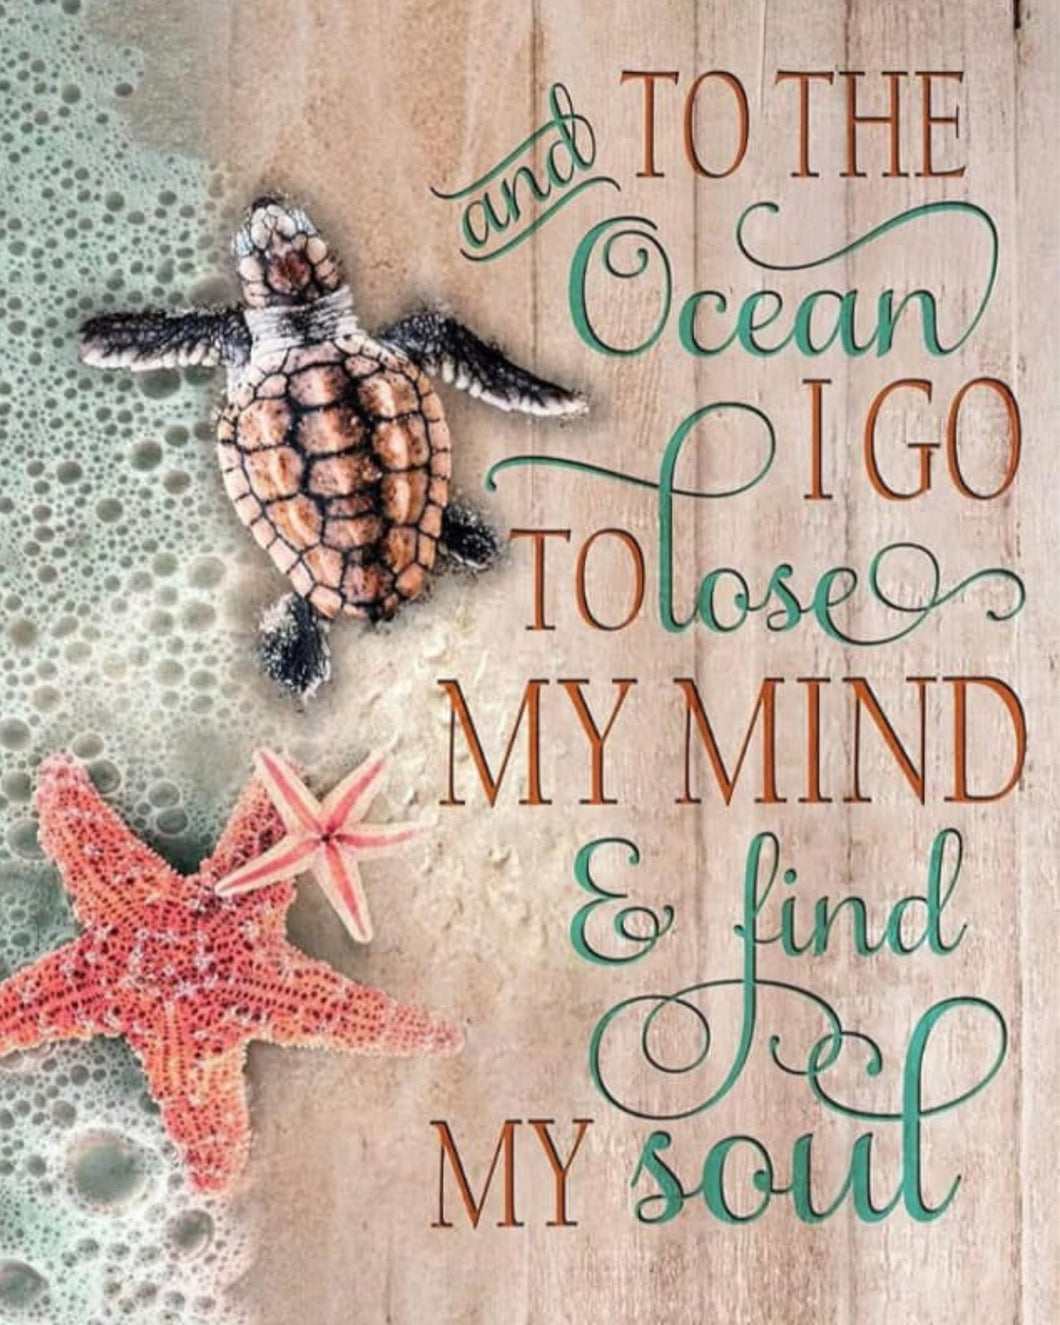 To the Ocean I Go - Diamond Painting Bling Art  Turtle, starfish, sand, inspirational quote